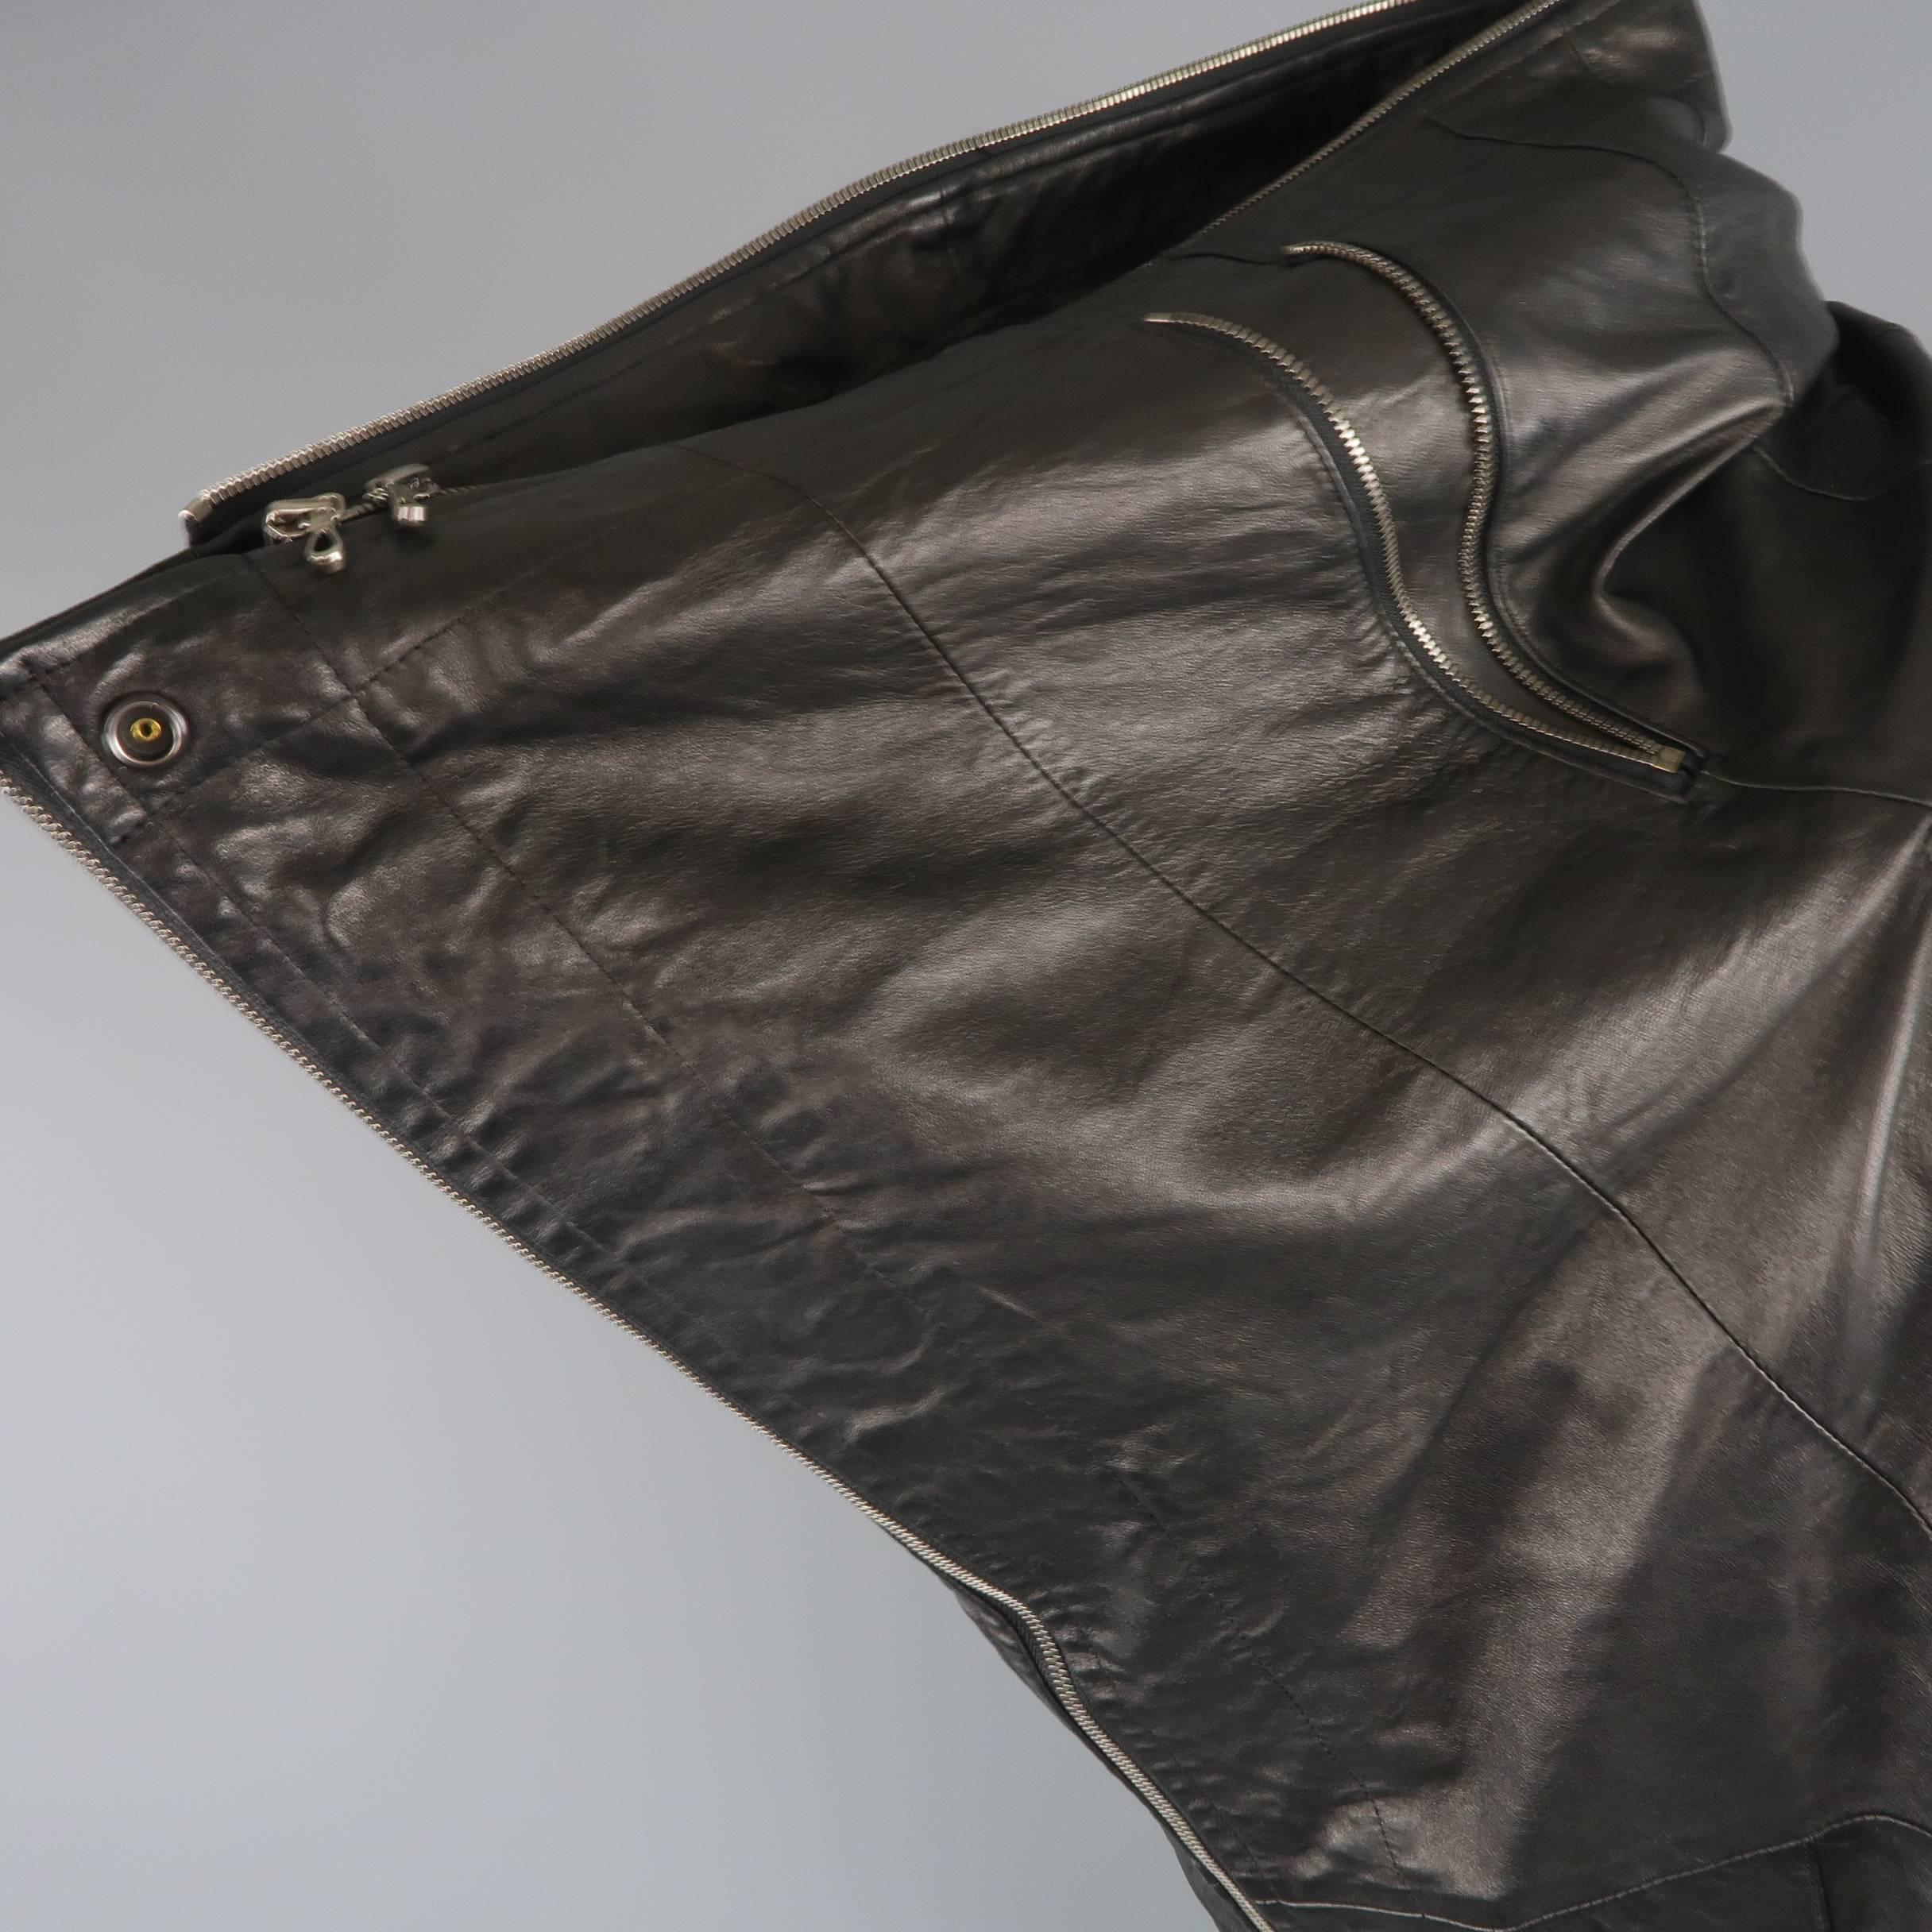 Ma_Julius Fall-Winter 2010  biker vest comes in soft lambskin leather with a double zip front and oversized draped collar with extra snaps and zip for convertible wear. Made in Japan.
 
Excellent Pre-Owned Condition.
Marked: JP 2
 
Measurements:
   